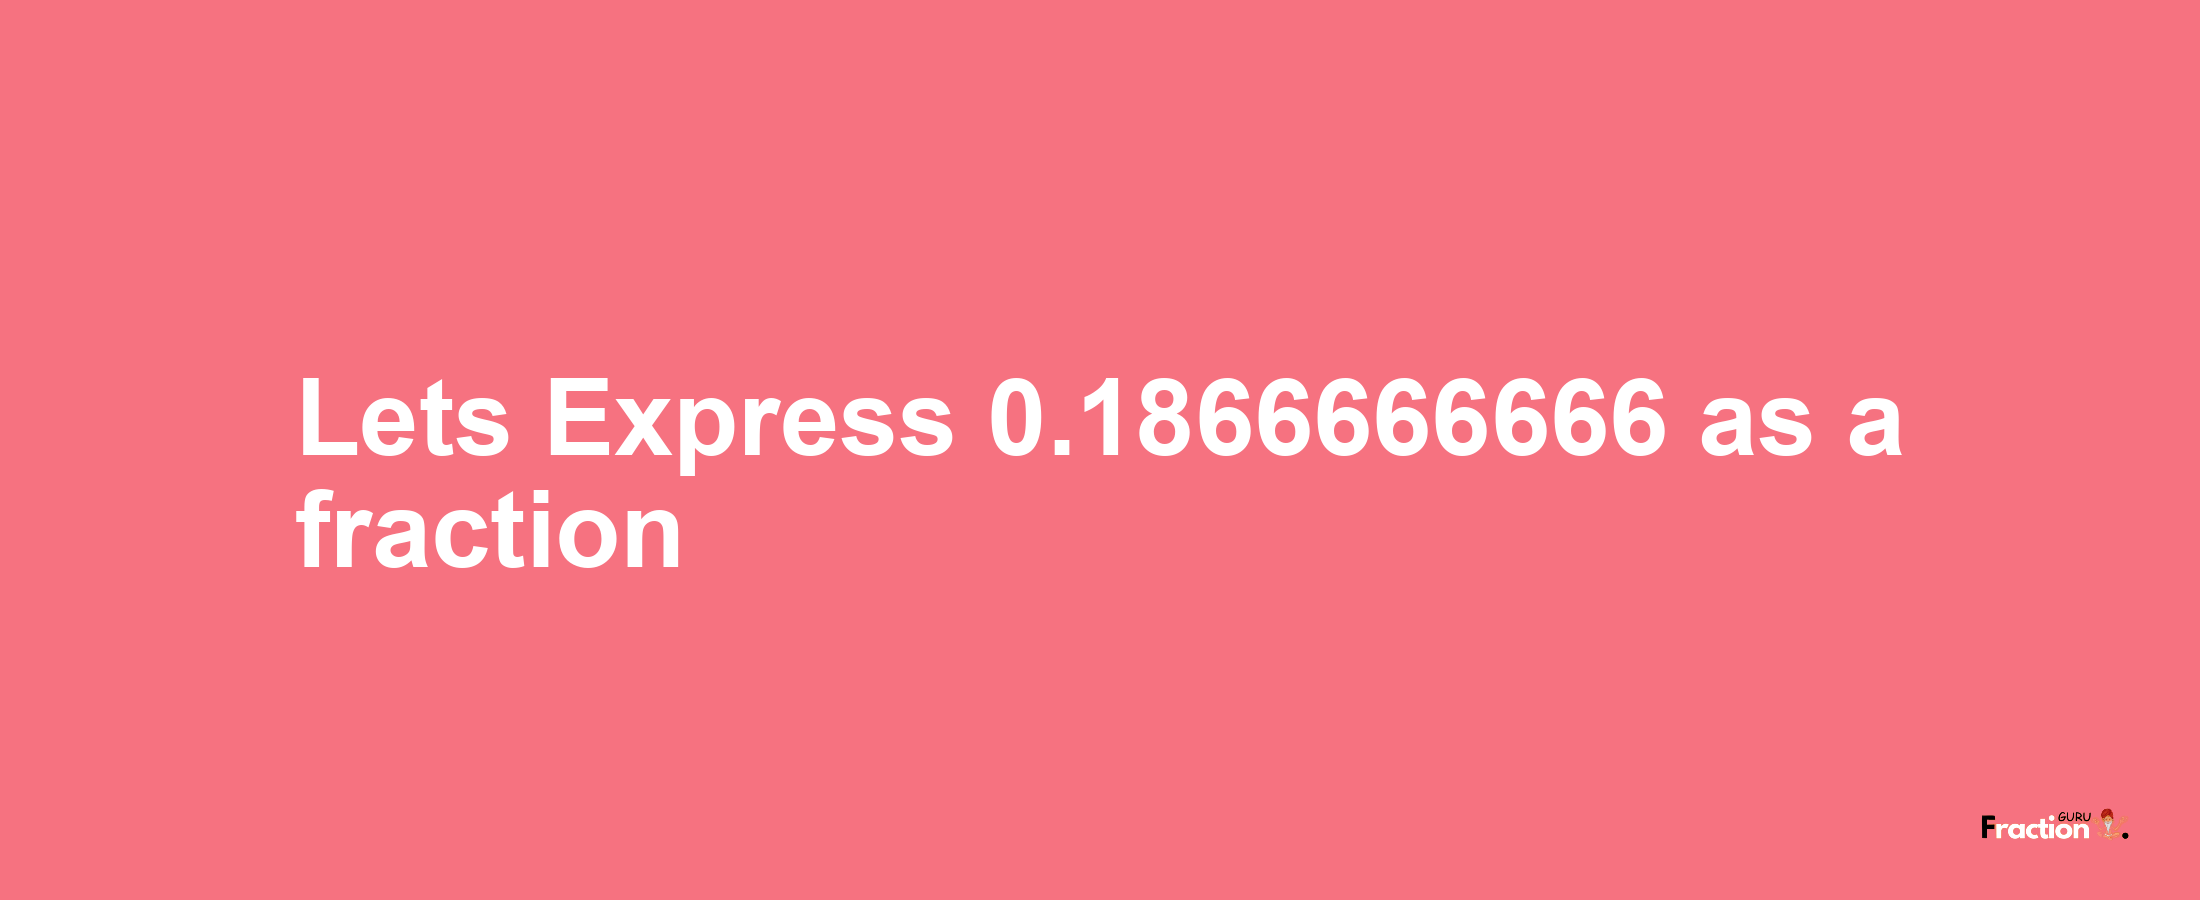 Lets Express 0.1866666666 as afraction